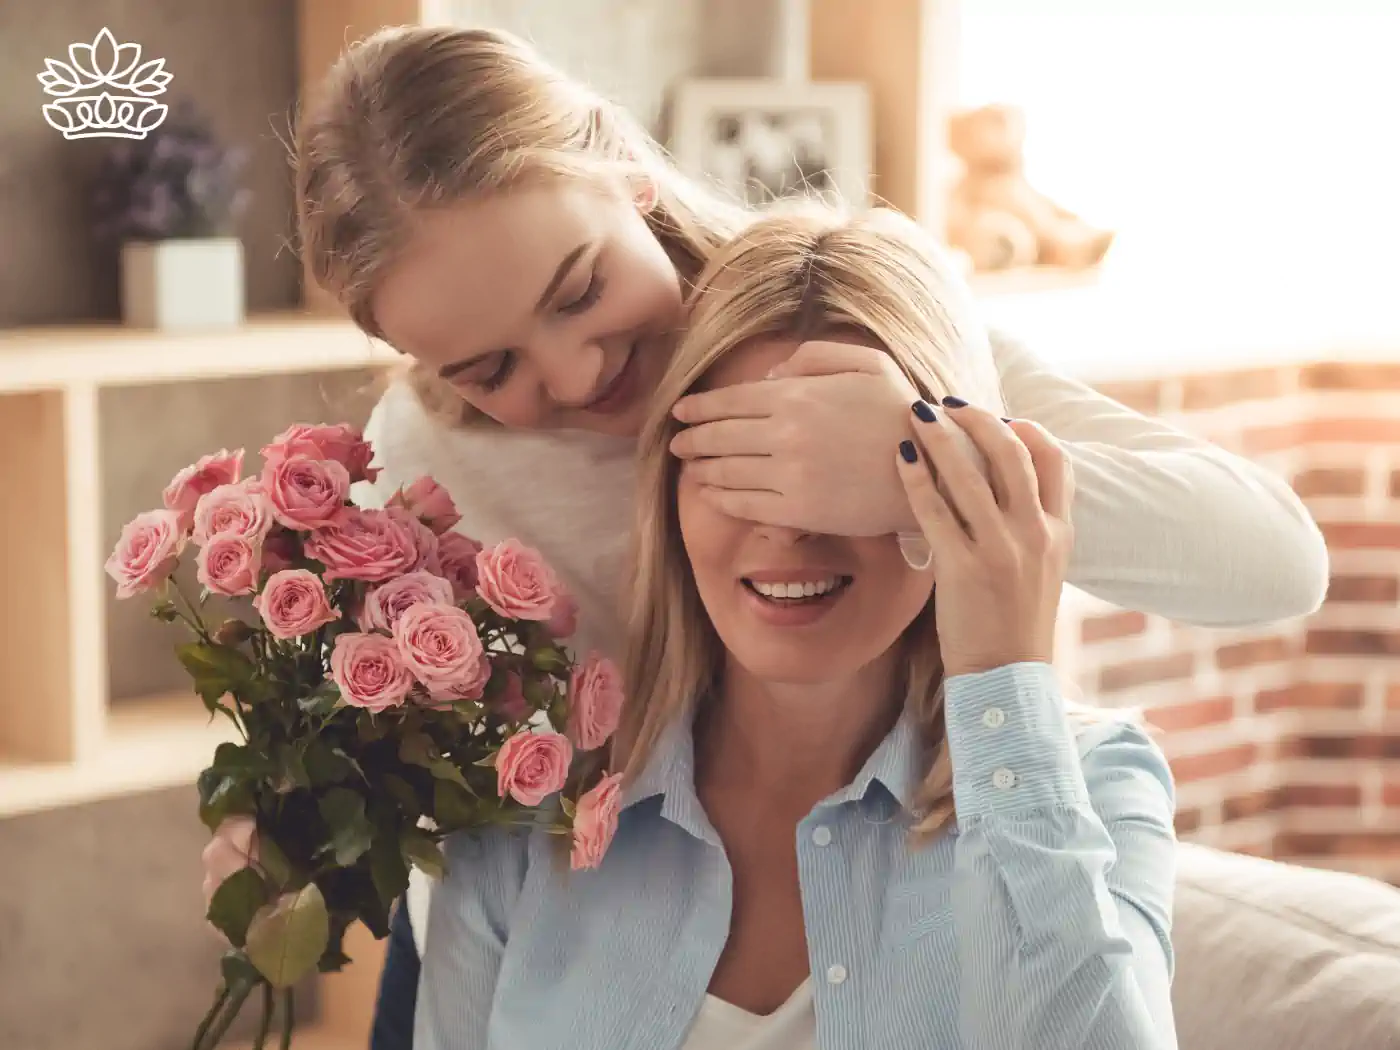 Young girl surprising her mother with a bouquet of pink roses - Zodiac Signs - Fabulous Flowers and Gifts